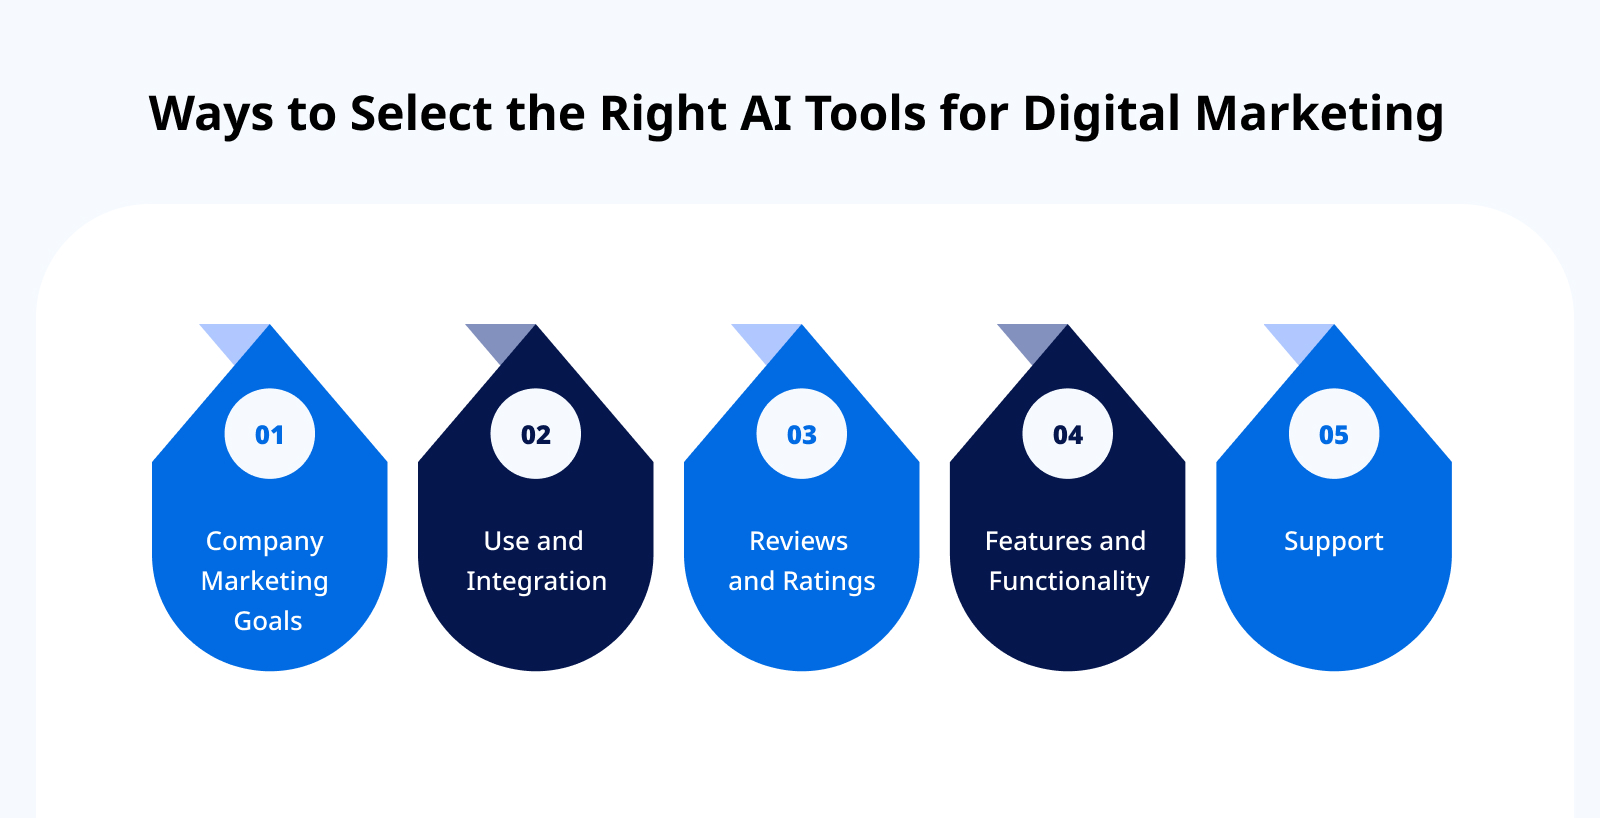 Ways to Select the Right AI Tools for Digital Marketing